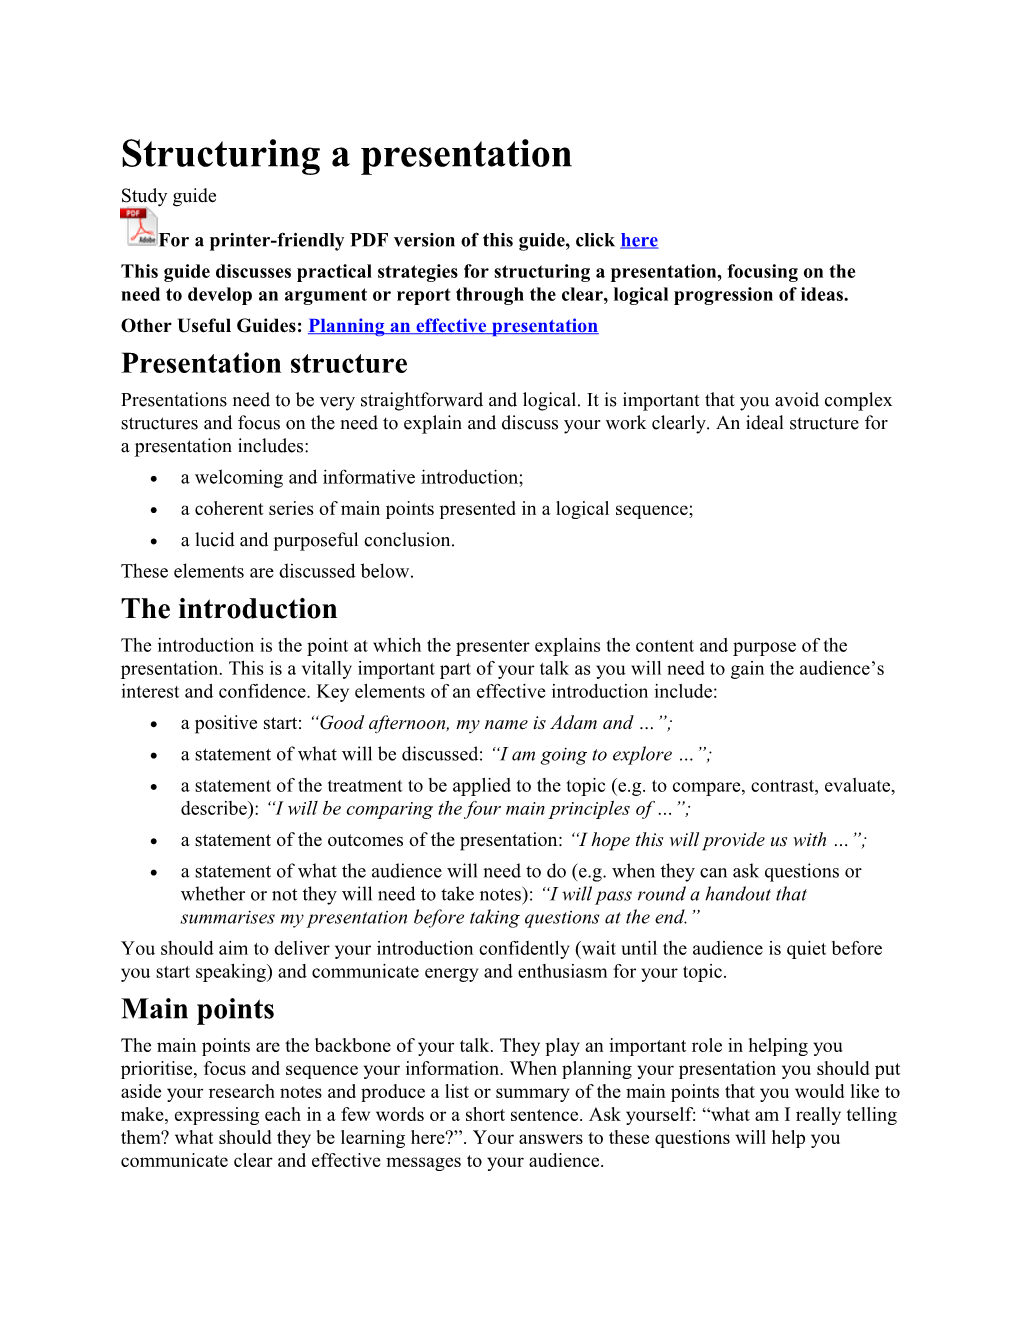 Structuring a Presentation